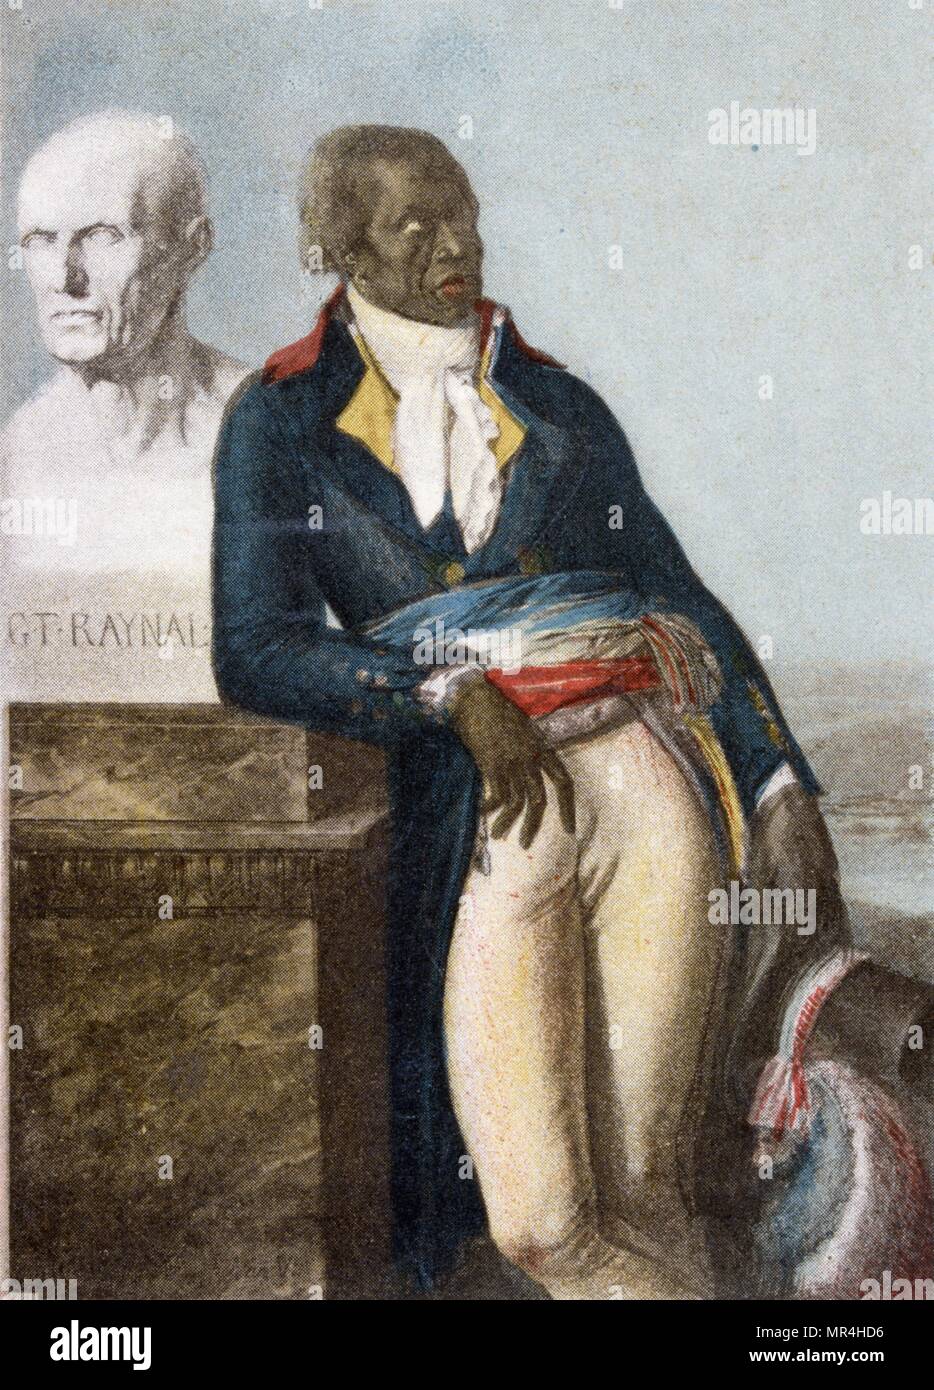 Portrait of Jean Baptiste Belley, Deputy for Saint-Domingue, by Anne-Louis Girodet de Roussy-Trioson (1767 - 1824). Jean-Baptiste Belley (c. 1746 - 1805) was a native of Senegal and former slave from Saint-Domingue in the French West Indies who during the period of the French Revolution became a member of the National Convention and the Council of Five Hundred of France. He was also known as Mars Stock Photo